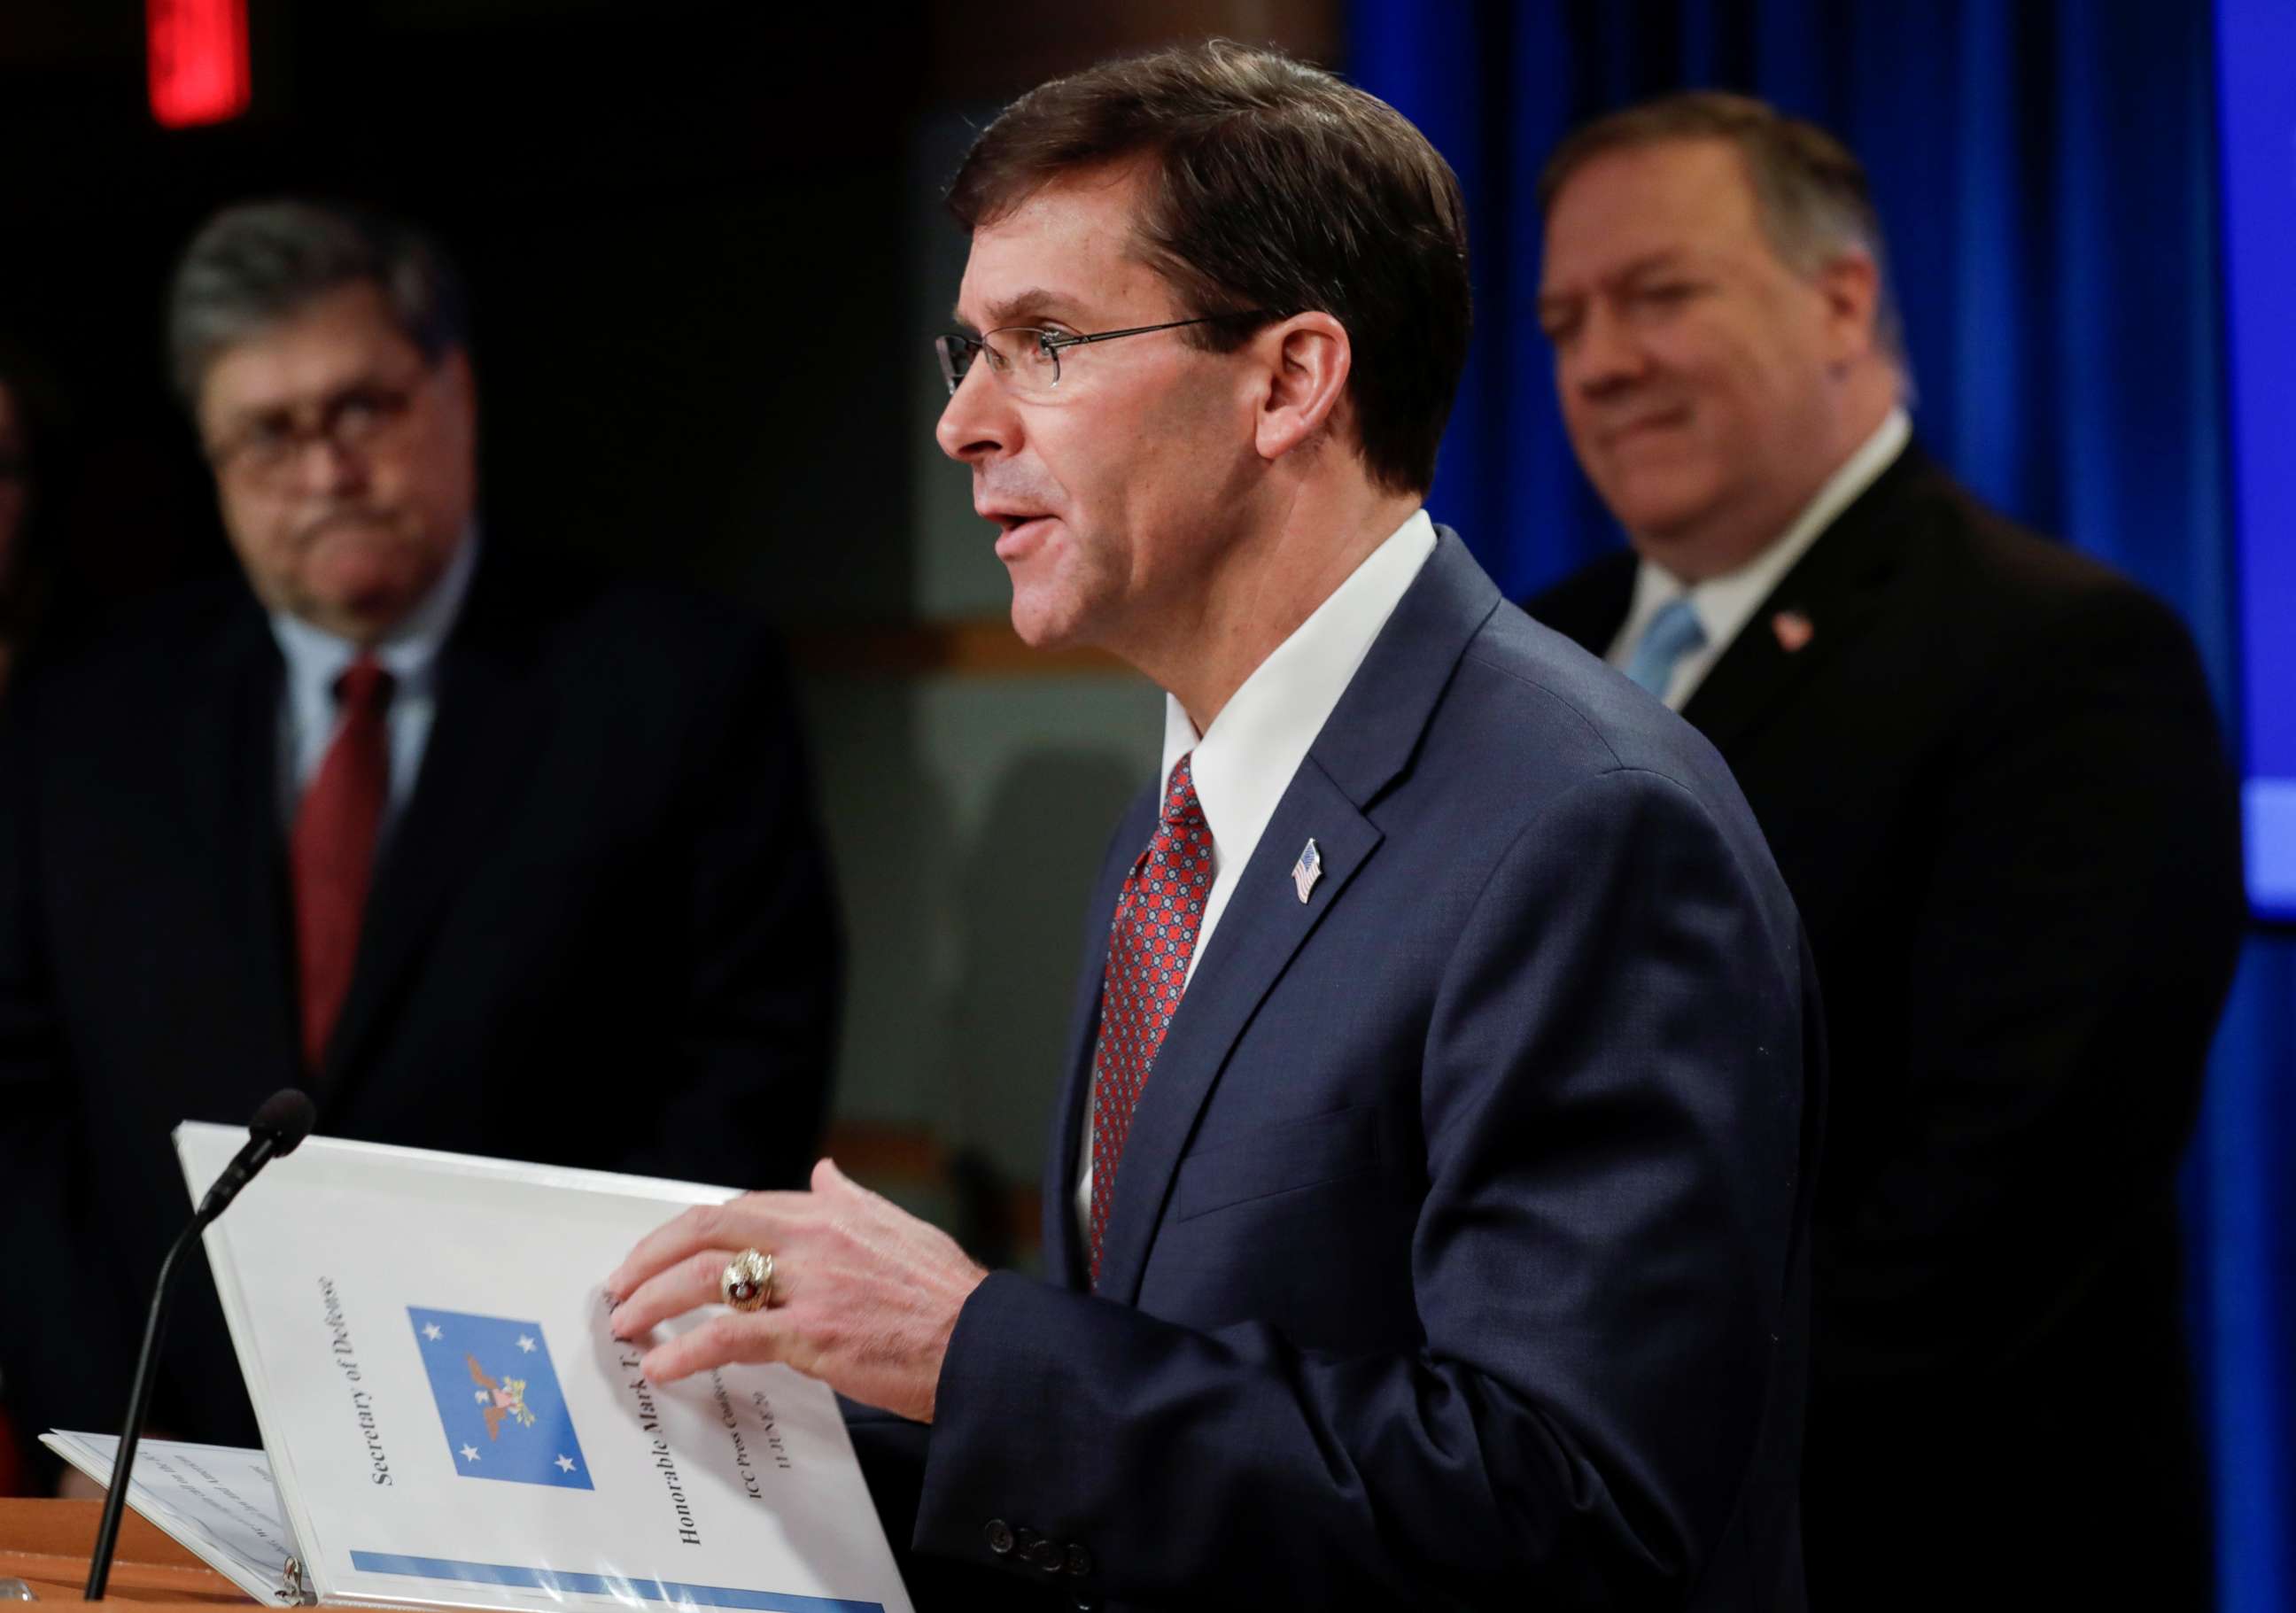 PHOTO: Defense Secretary Mark Esper concludes his statement as he participates in a joint briefing with Attorney General William Barr and Secretary of State Mike Pompeo in Washington, June 11, 2020.